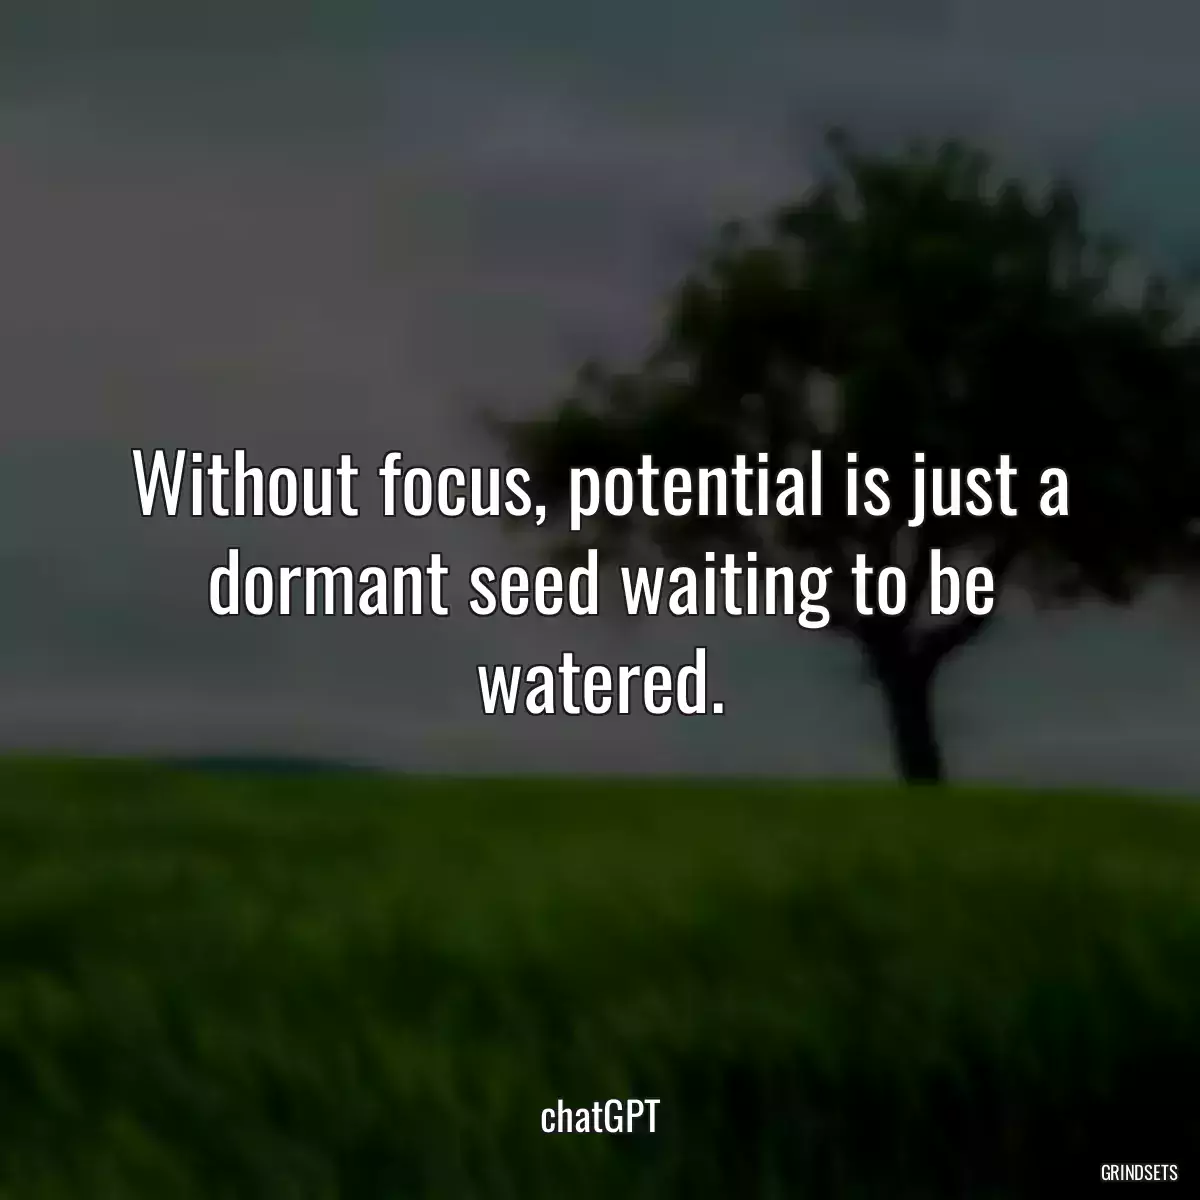 Without focus, potential is just a dormant seed waiting to be watered.